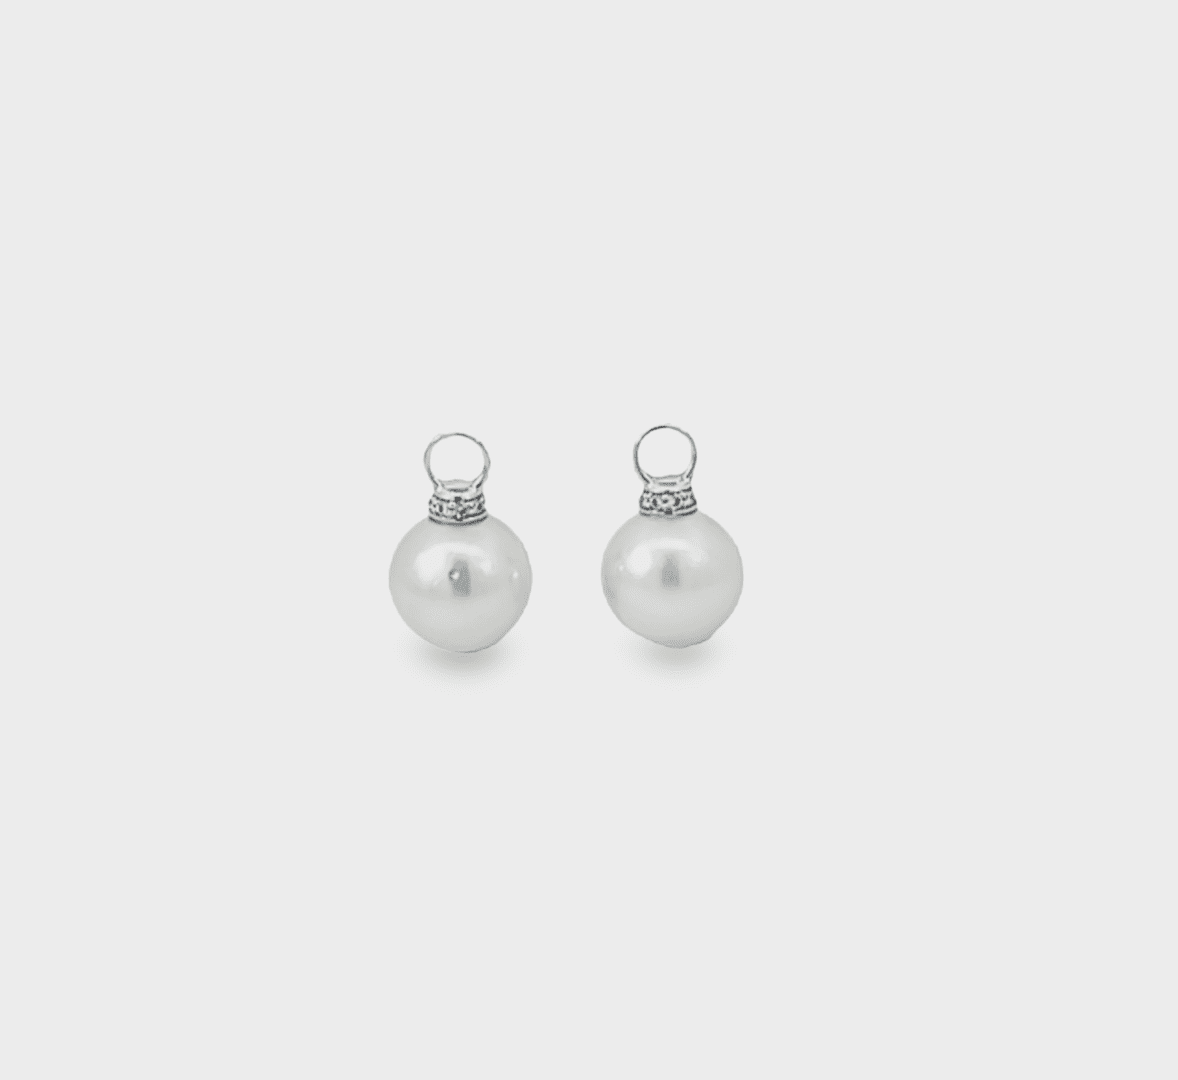 14mm White South Sea Pearls with 18kt White Gold & Diamond Cap